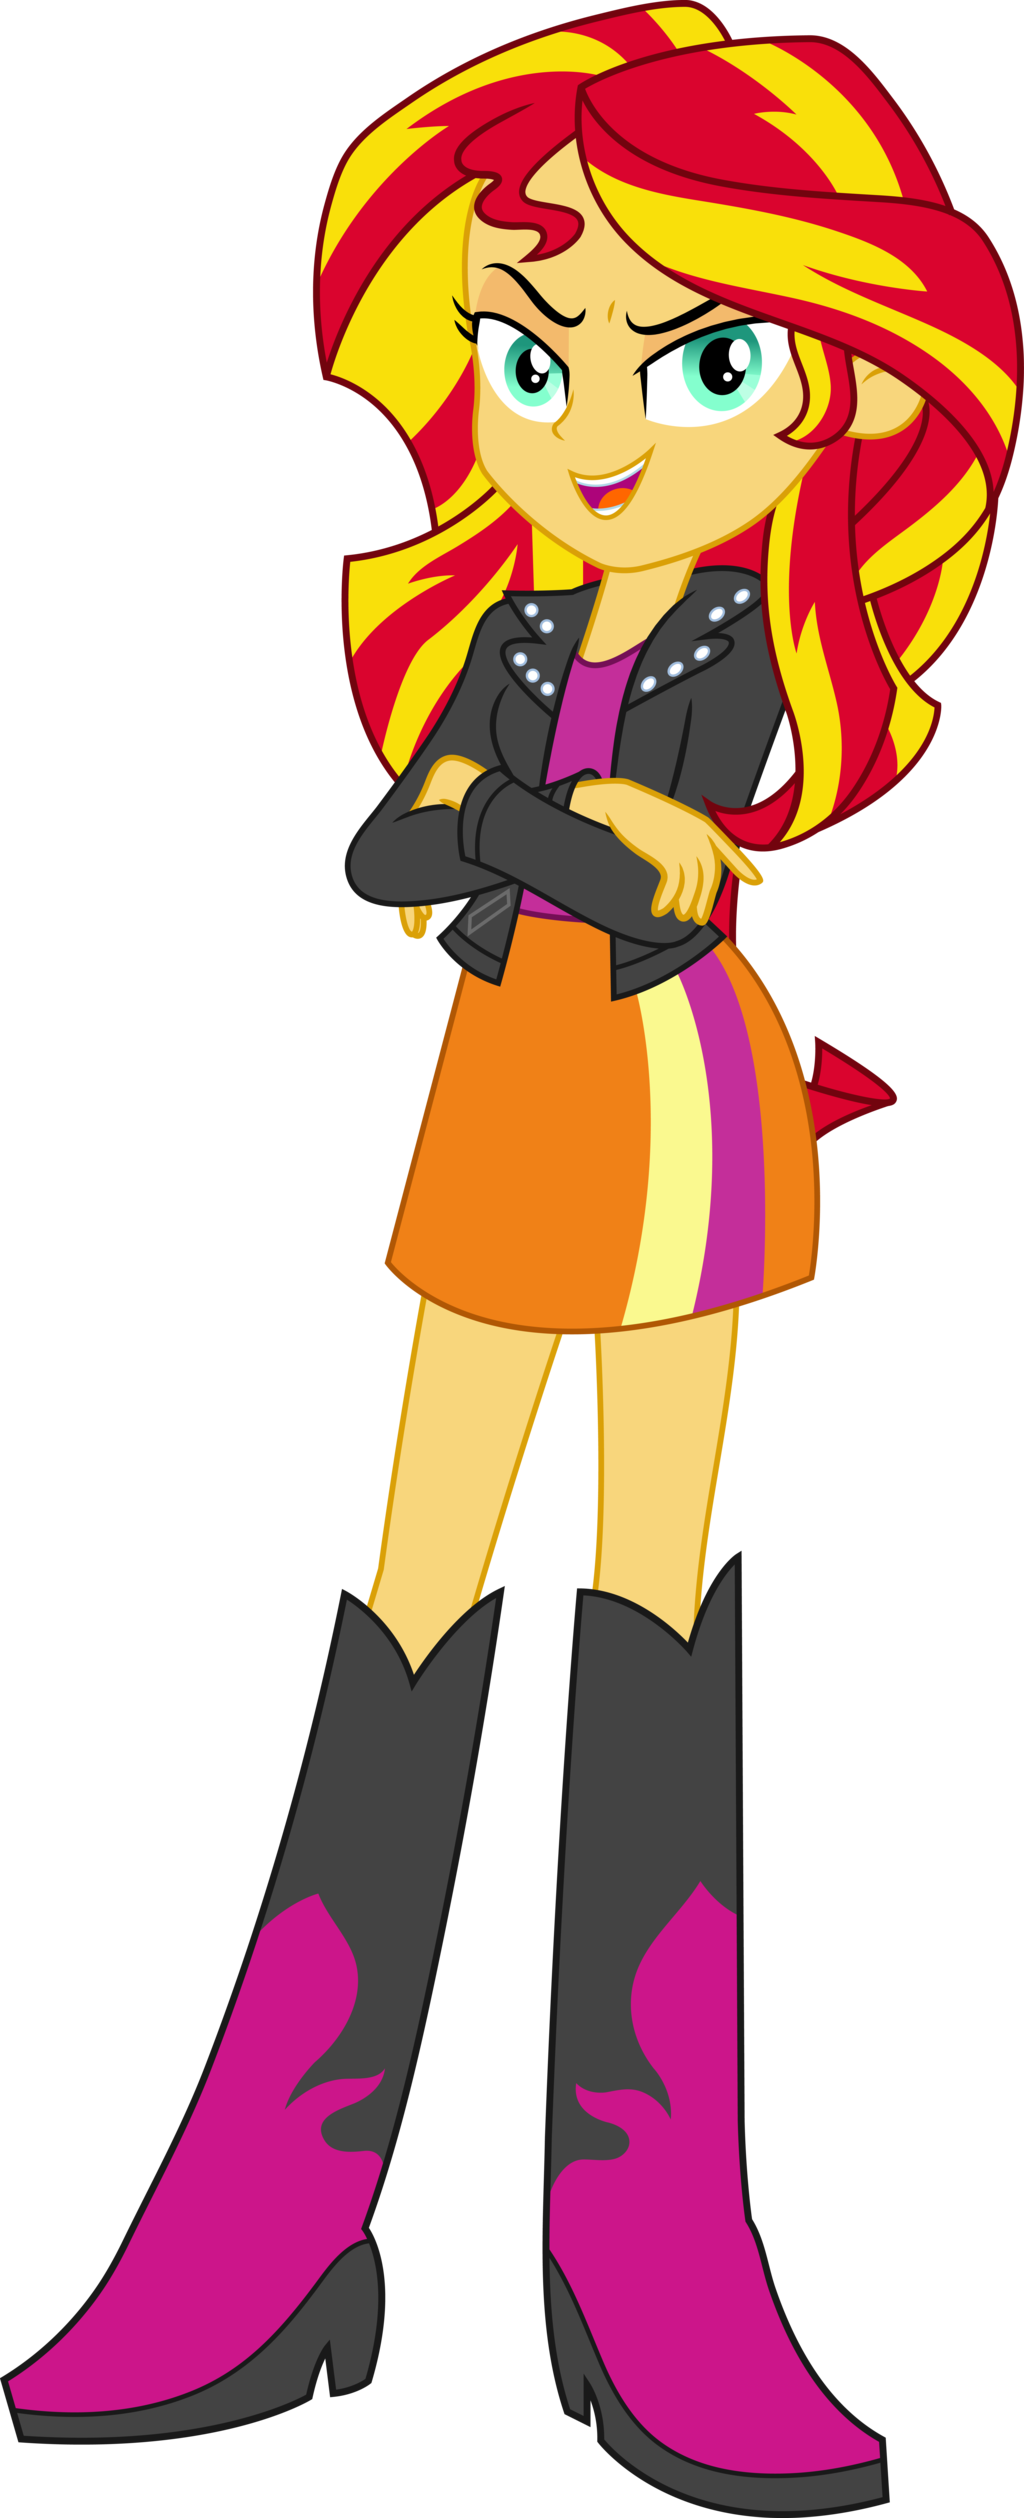 Equestria Girls Sunset Shimmer Vector By Icantunloveyou - My Little Pony Equestria Girls Sunset Shimmer (1024x2518)